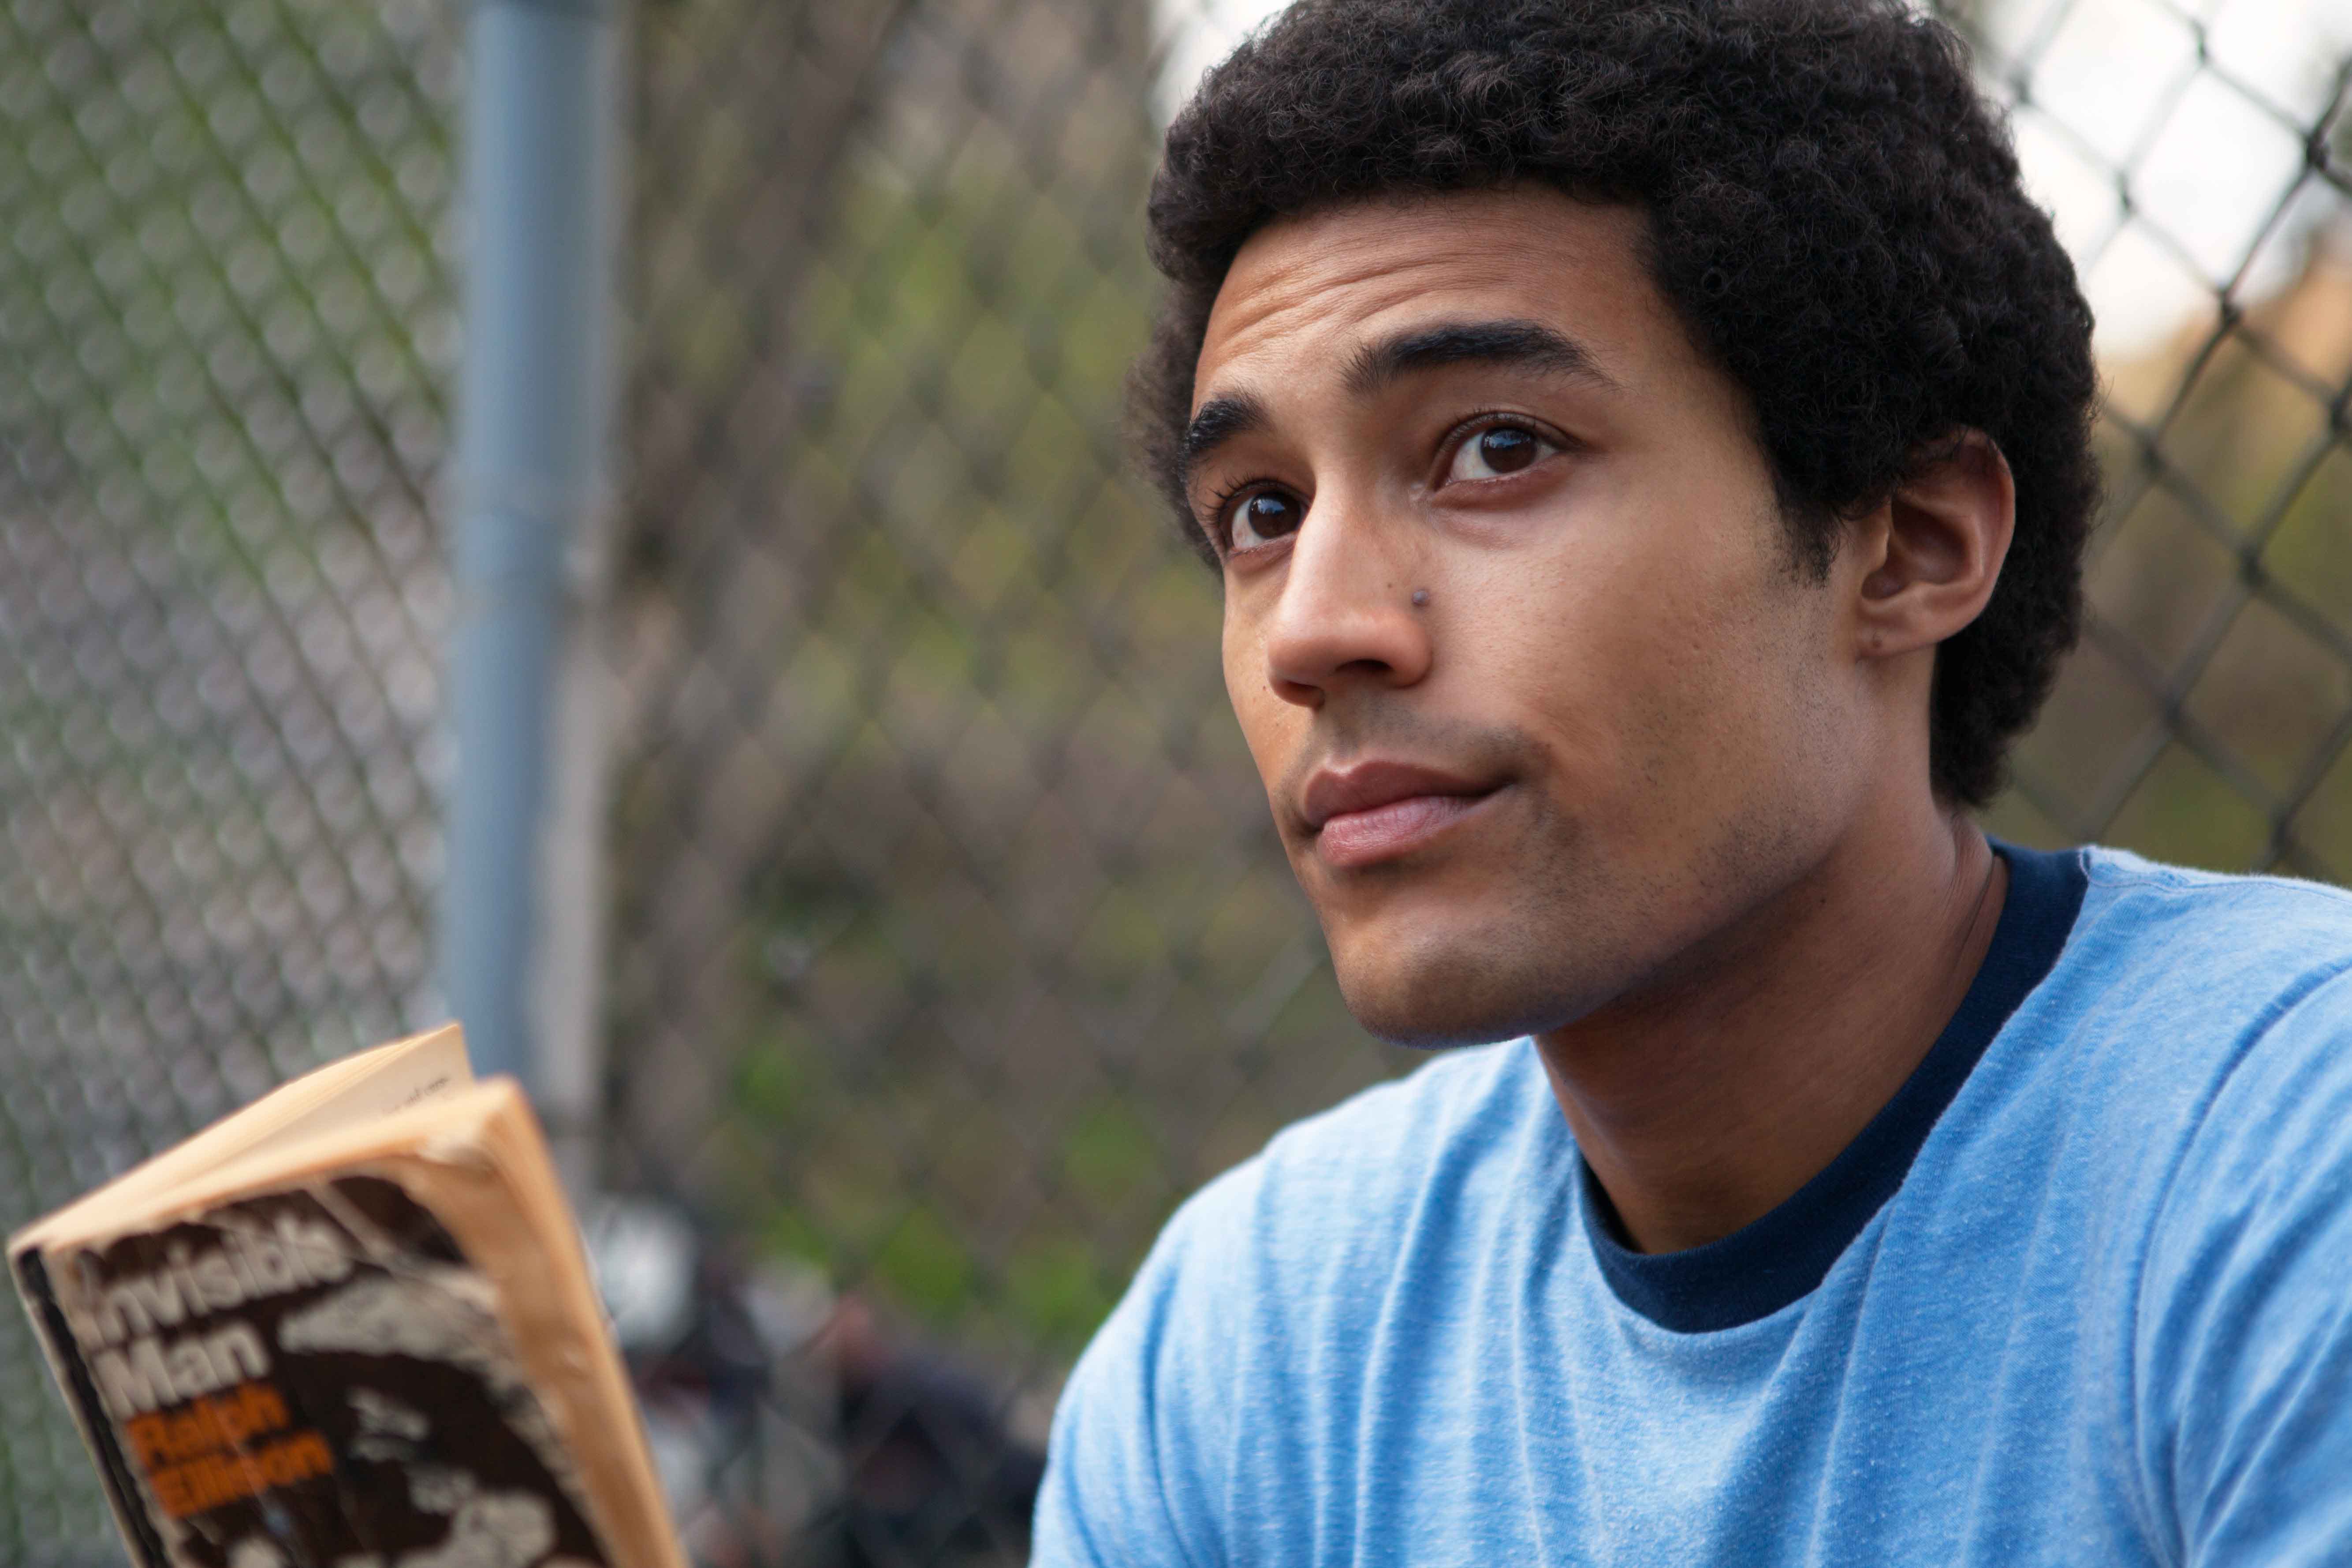 man playing the character of Barack Obama in the Barry Netflix's film with a small afro hairstyle wearing a blue t-shirt